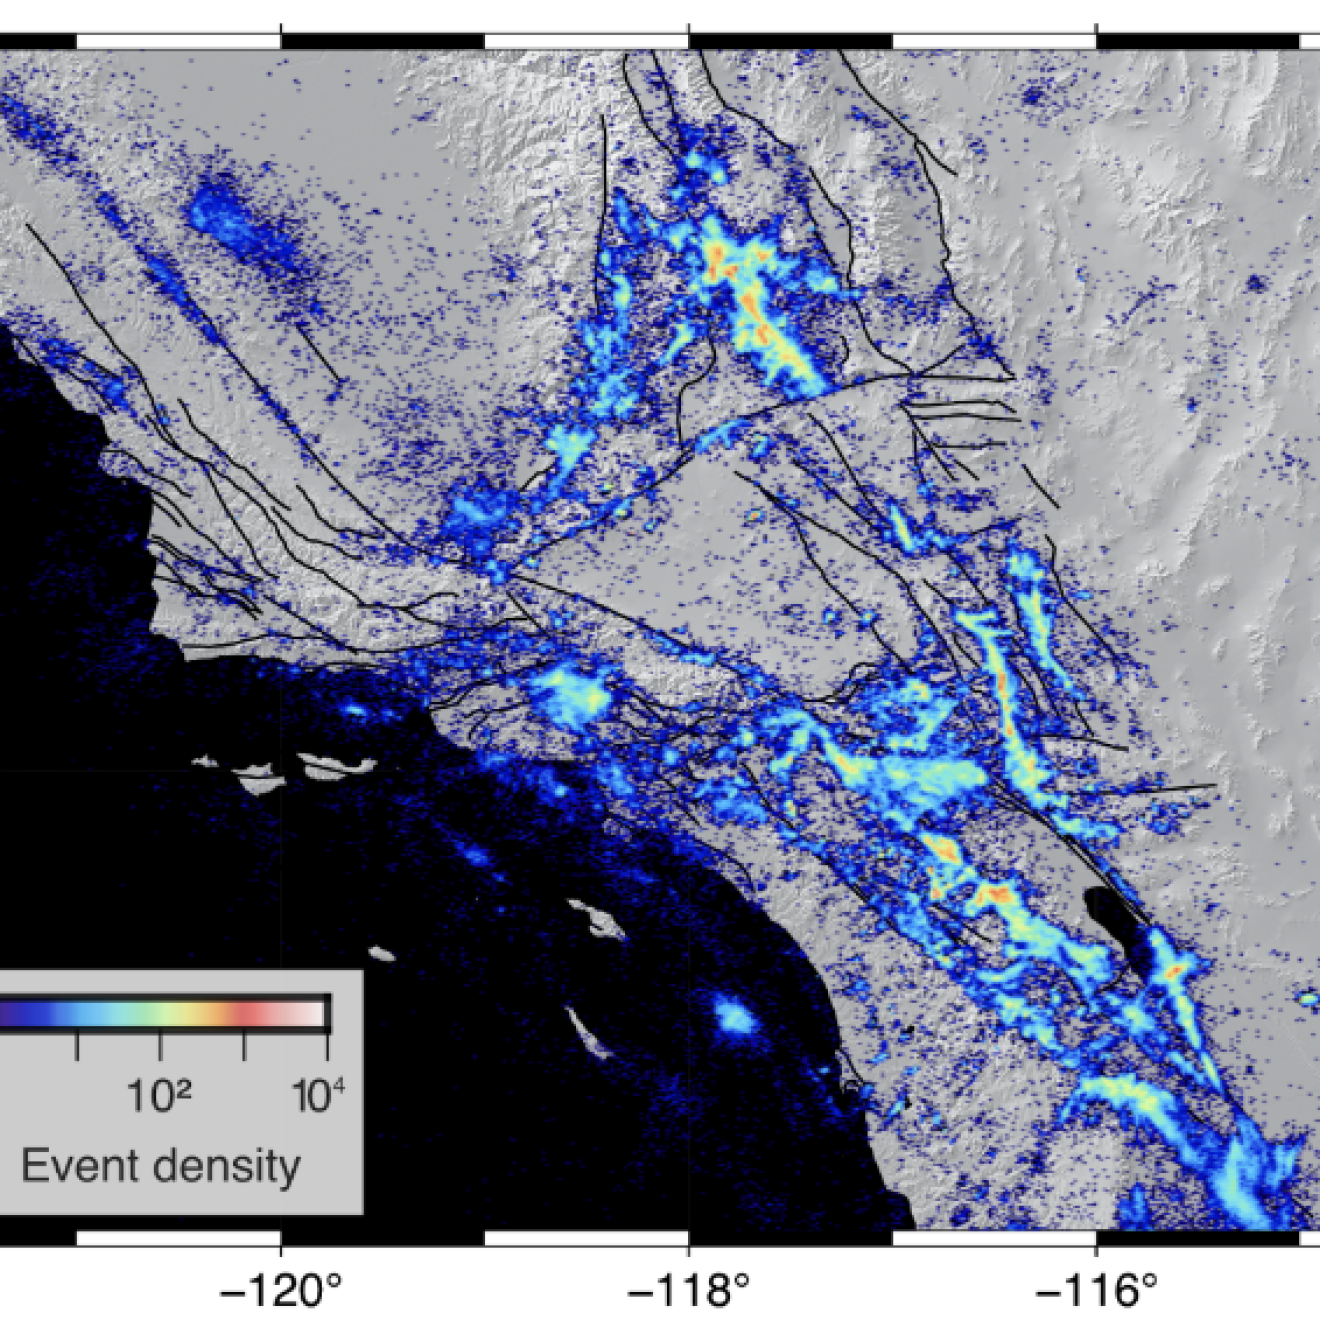 A map of Southern California with earthquakes plotted like weather